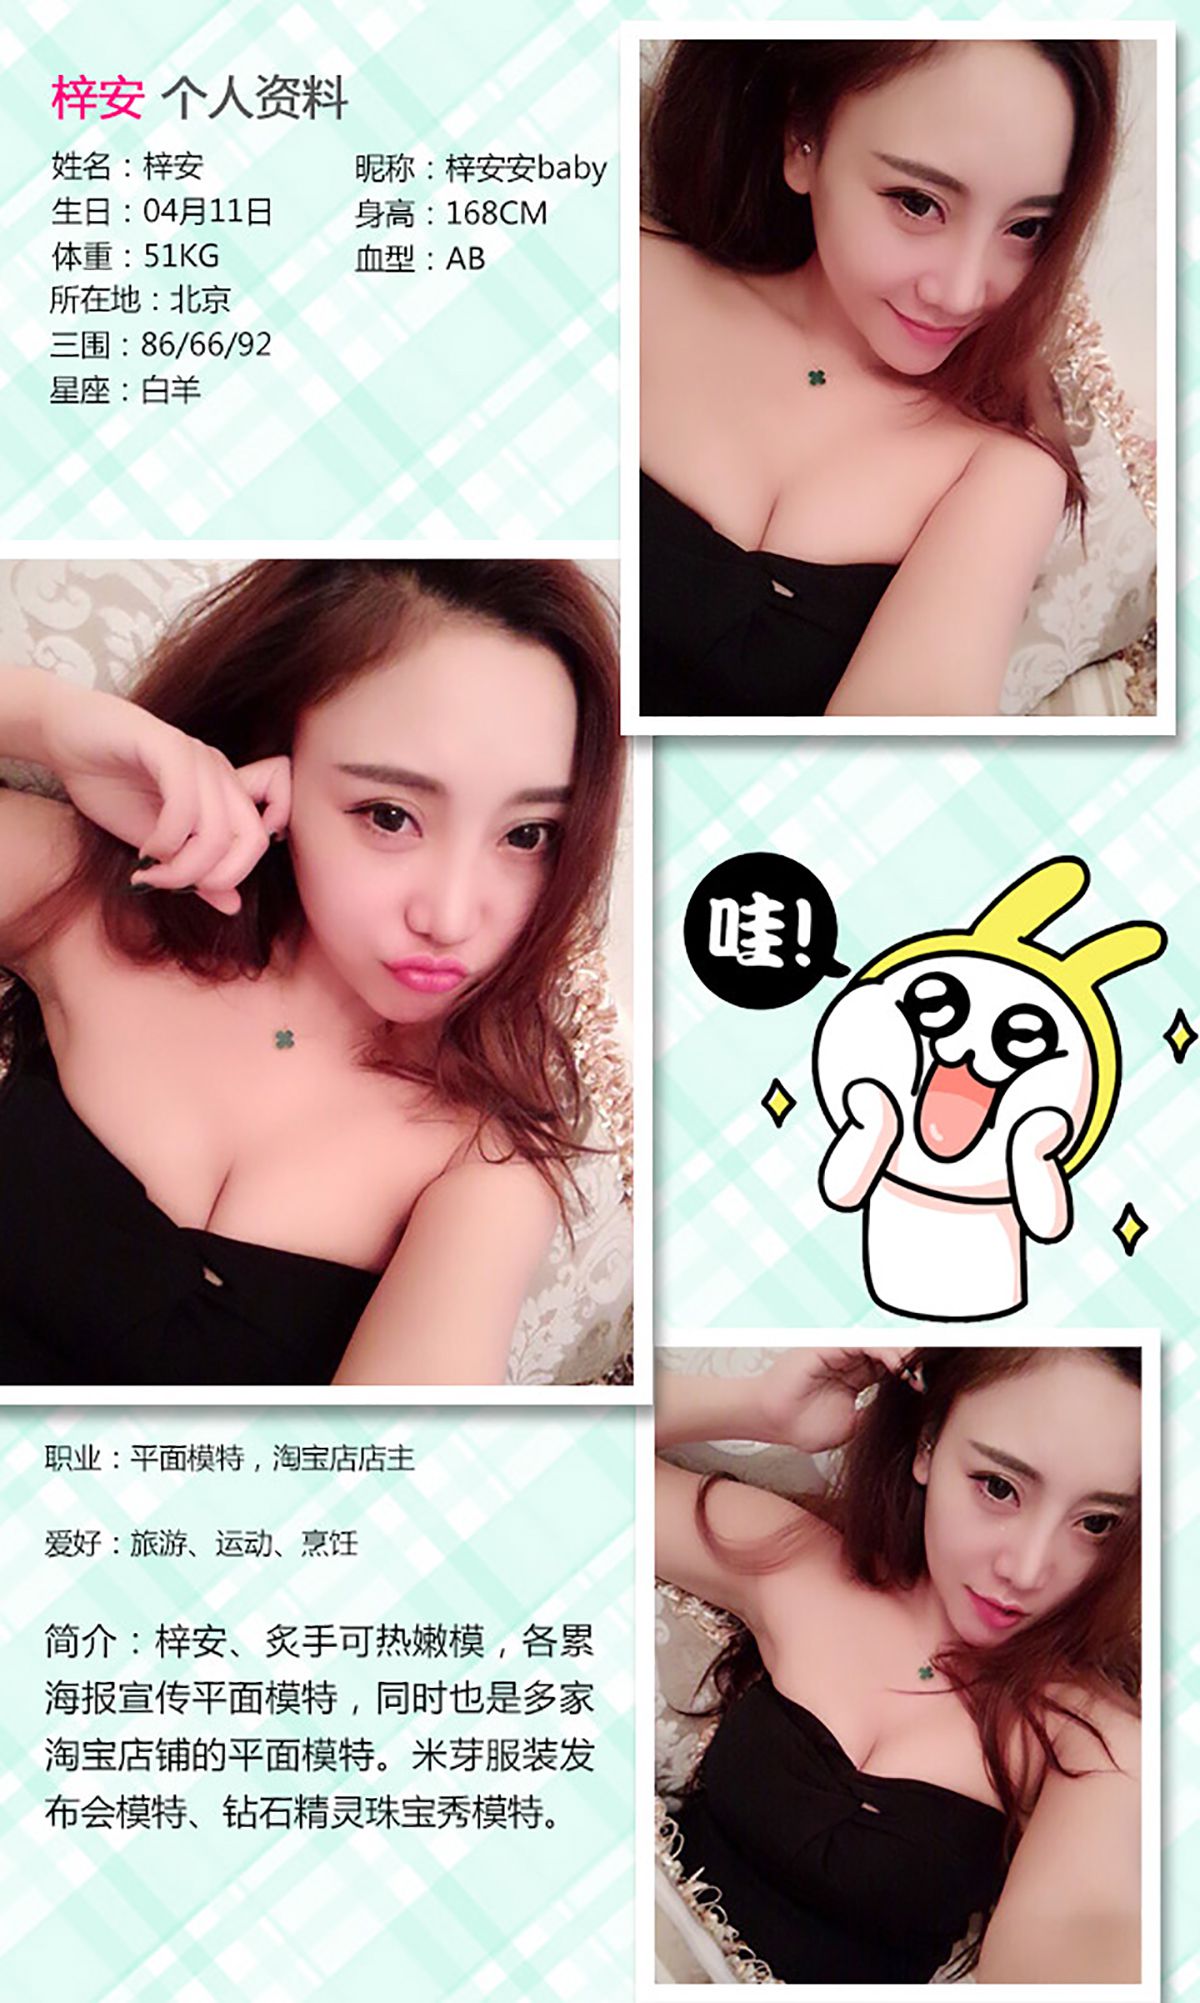 Zi’an “Tuesdays That Don’t Want to Get Up” [爱尤物Ugirls] No.189 Photo Album